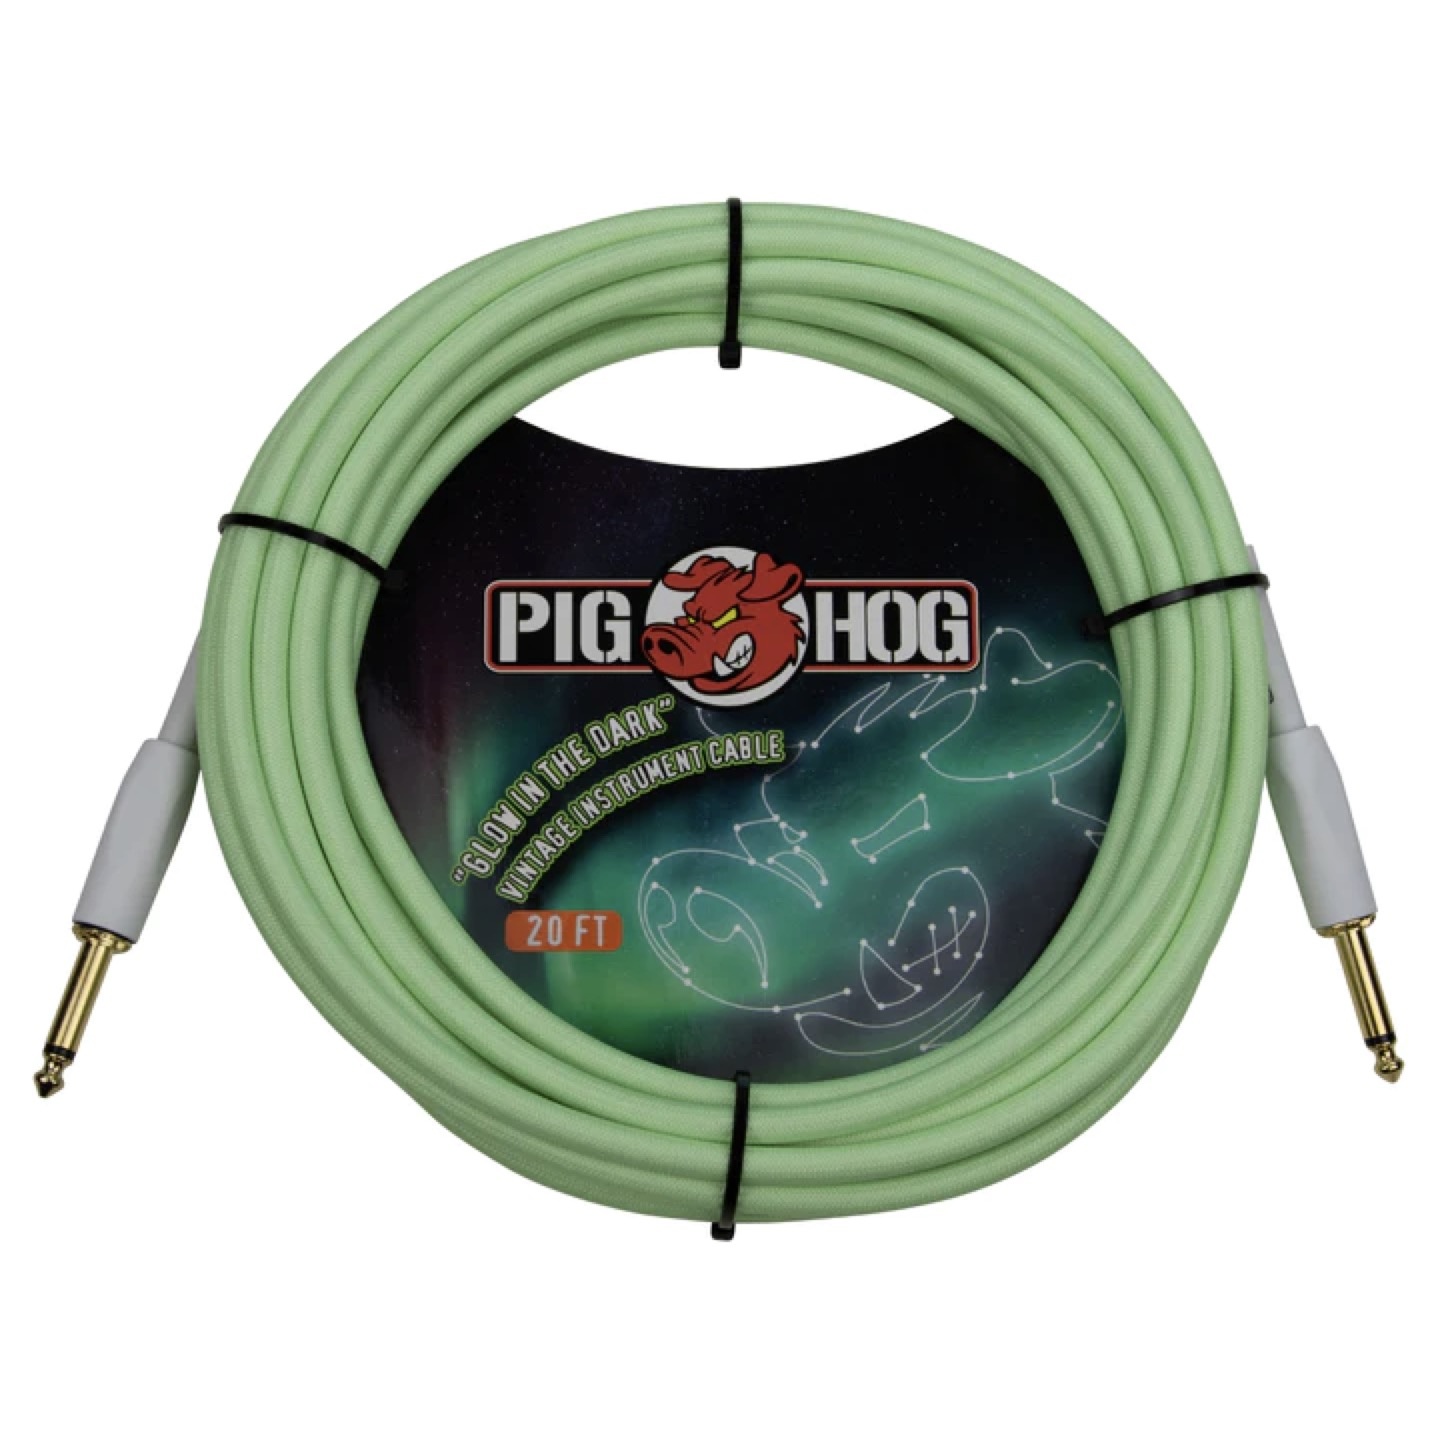 Pig Hog Glow-in-the-Dark Vintage Woven Instrument Cable, 20-Ft, Straight Plugs, 1/4"